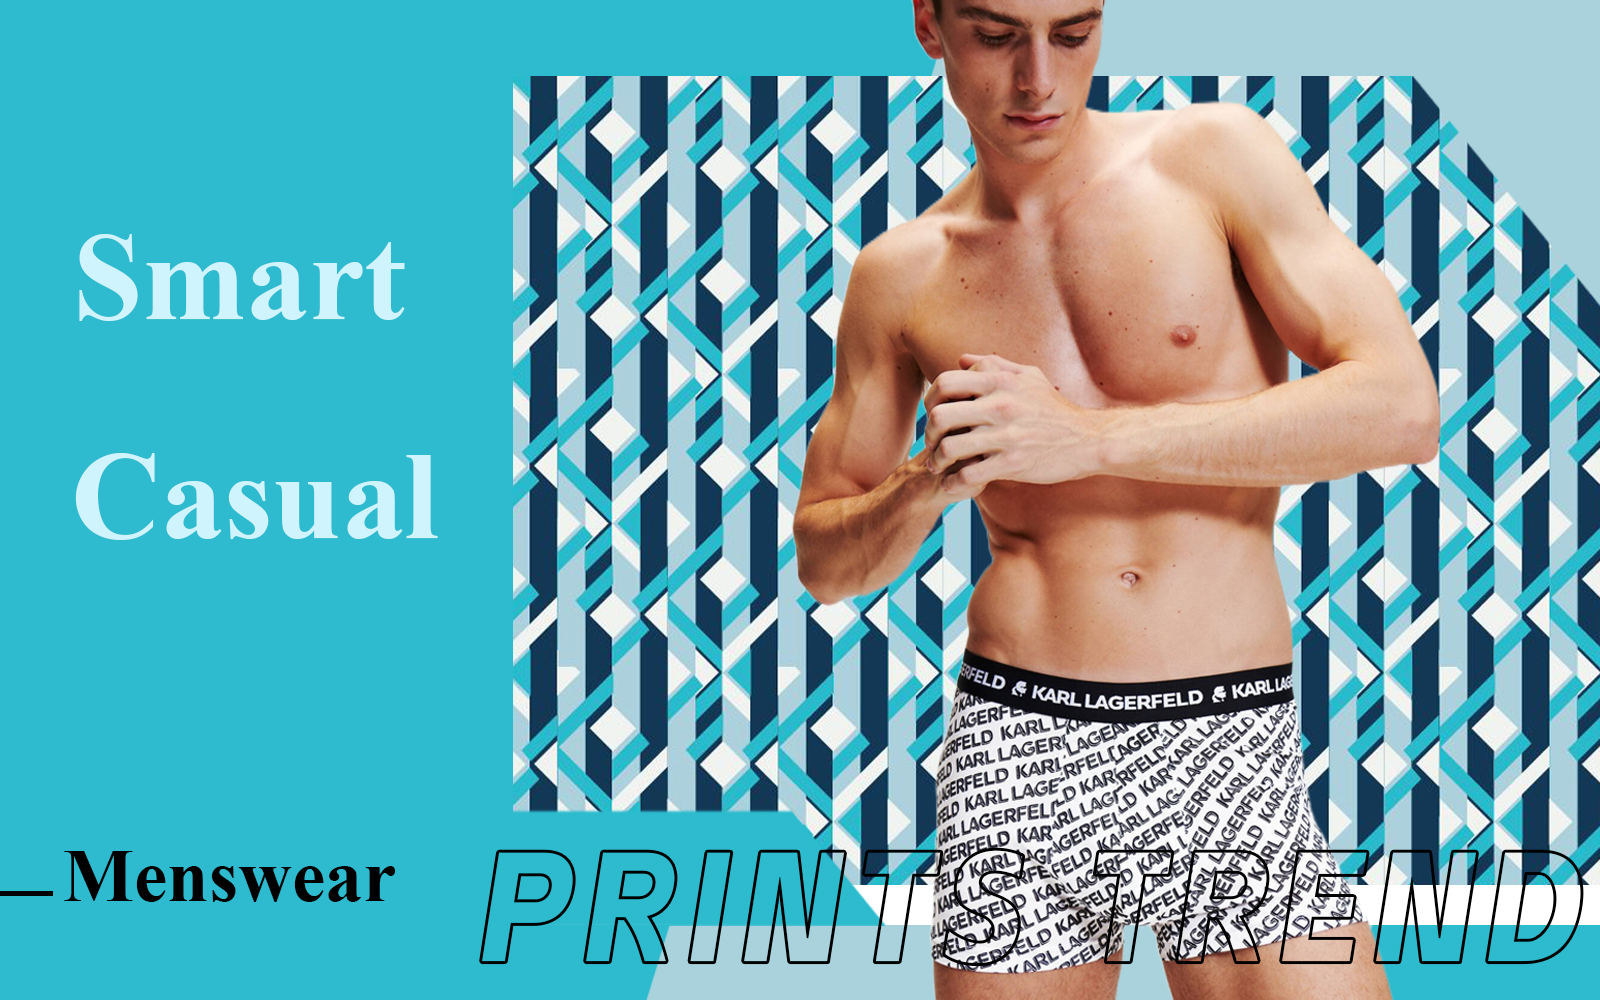 Smart Casual -- The Pattern Trend for Men's Briefs